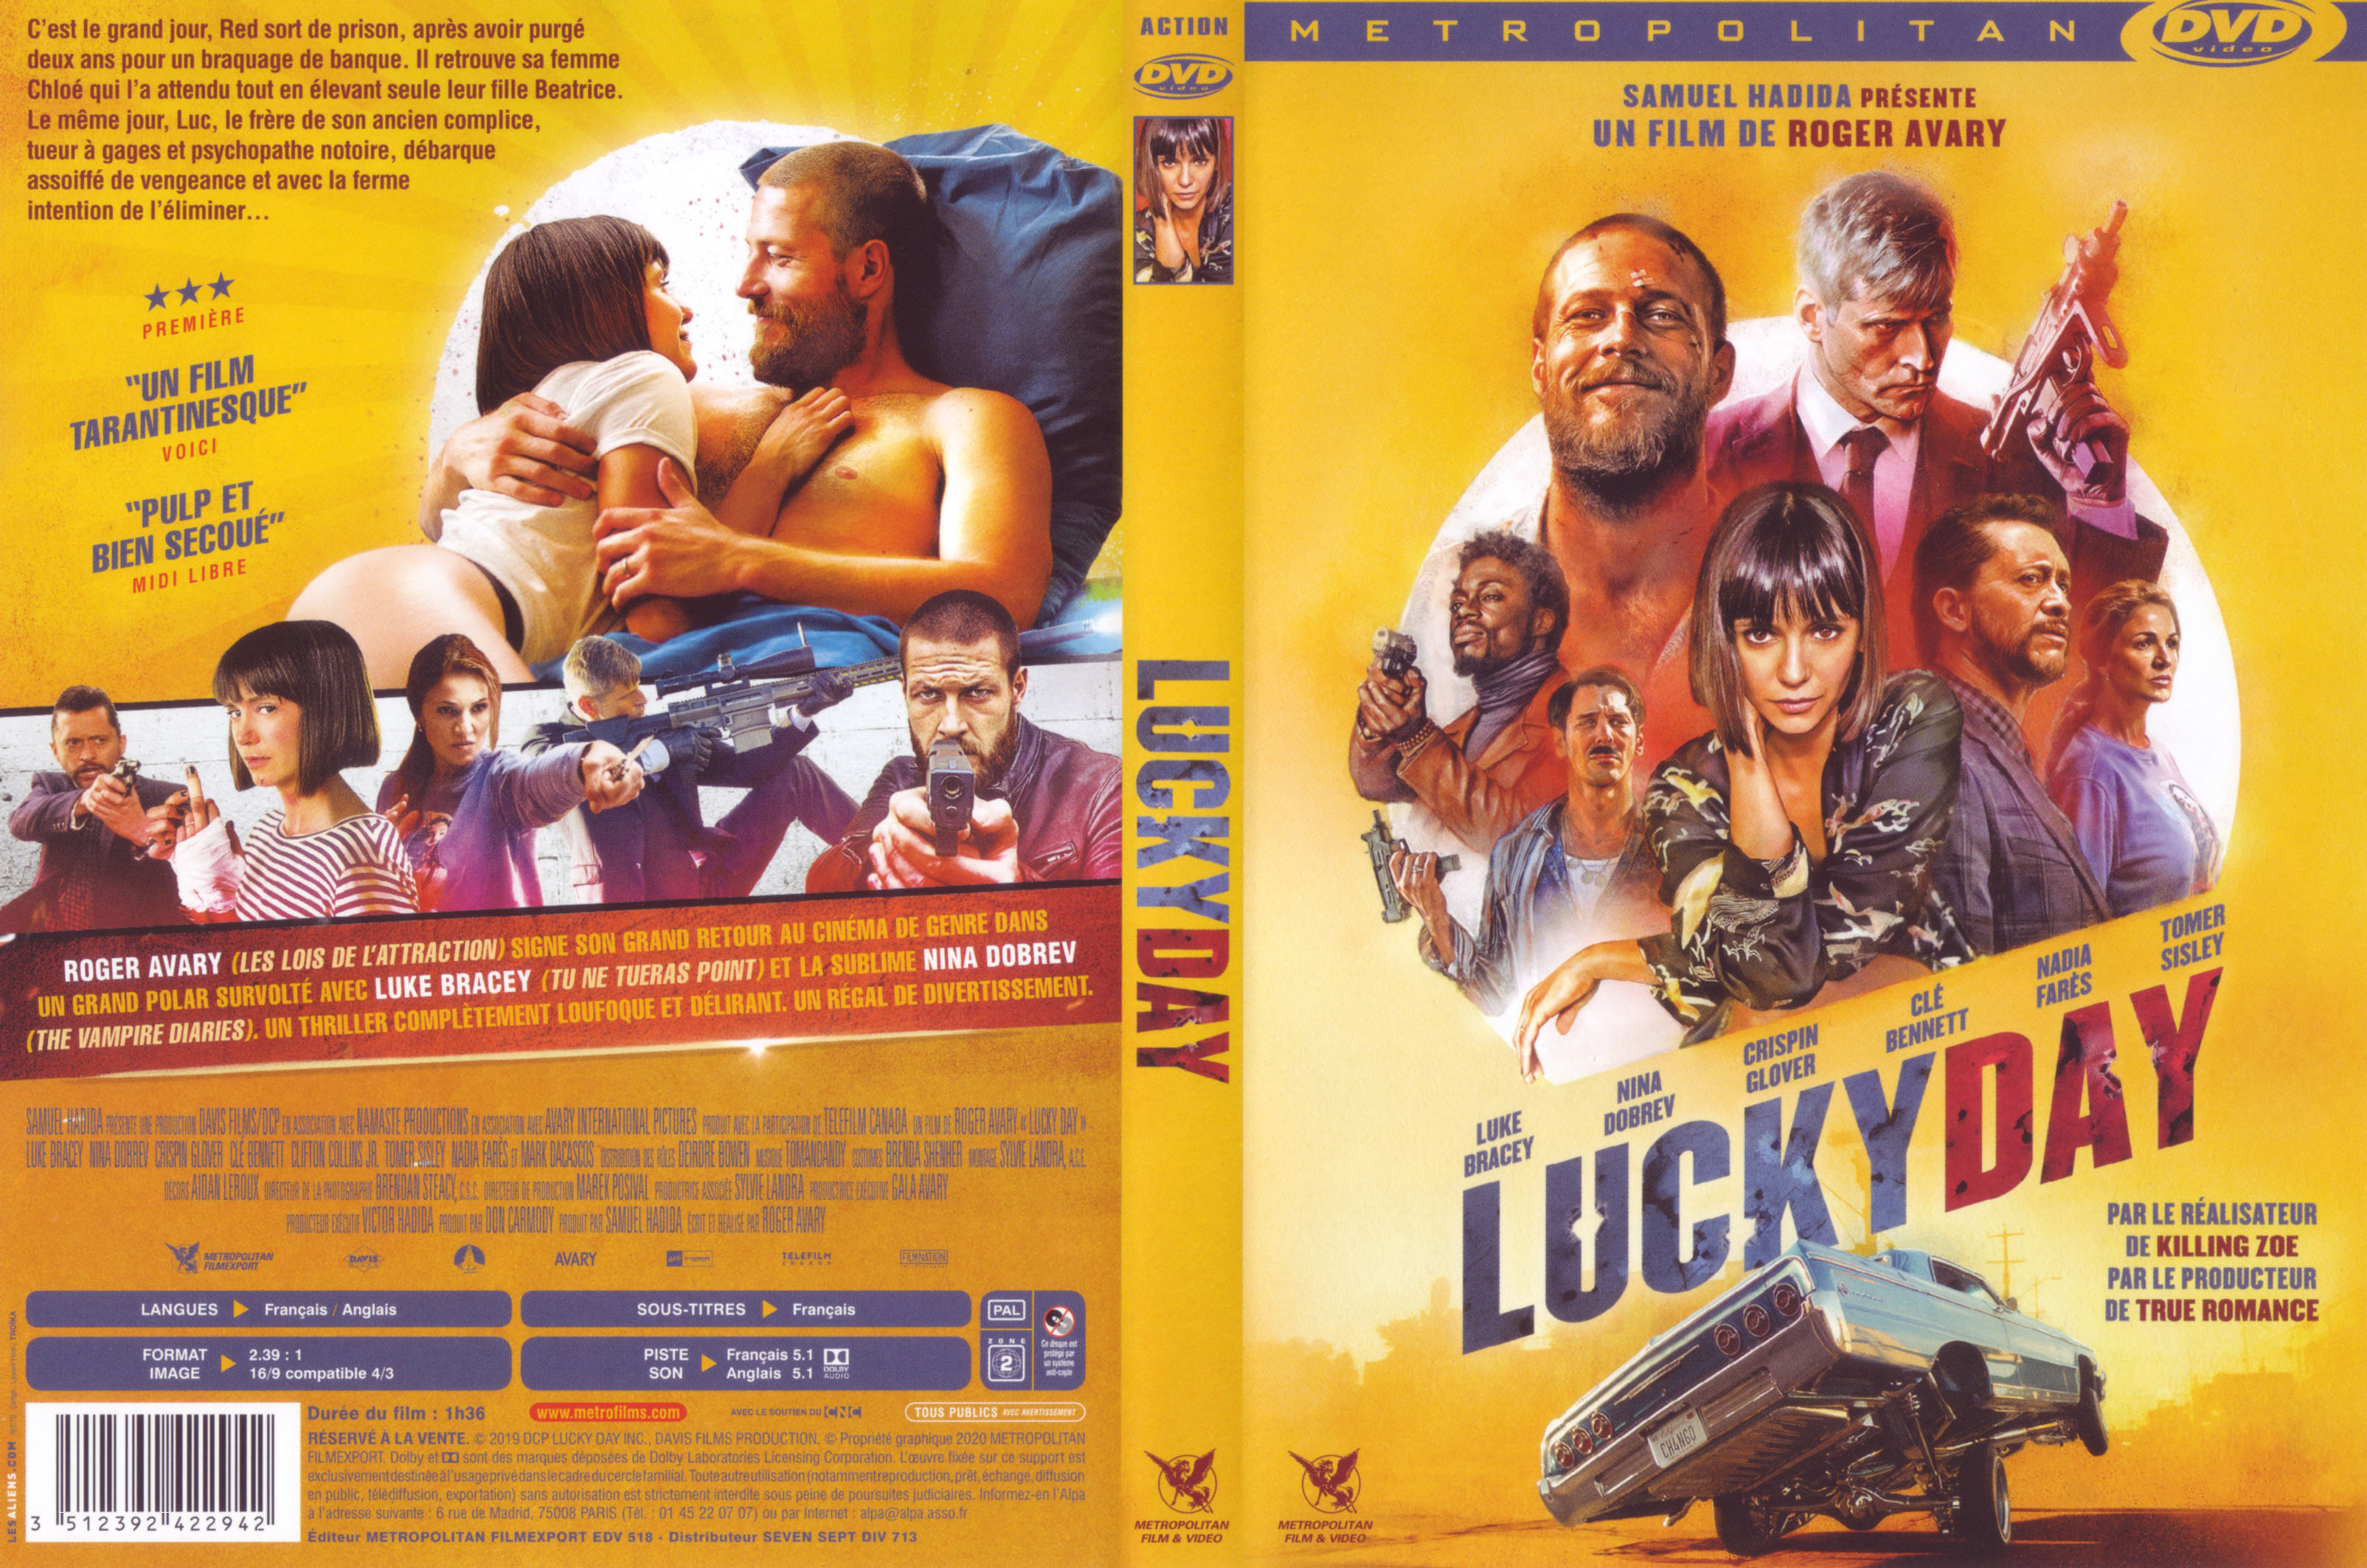 Jaquette DVD Lucky day